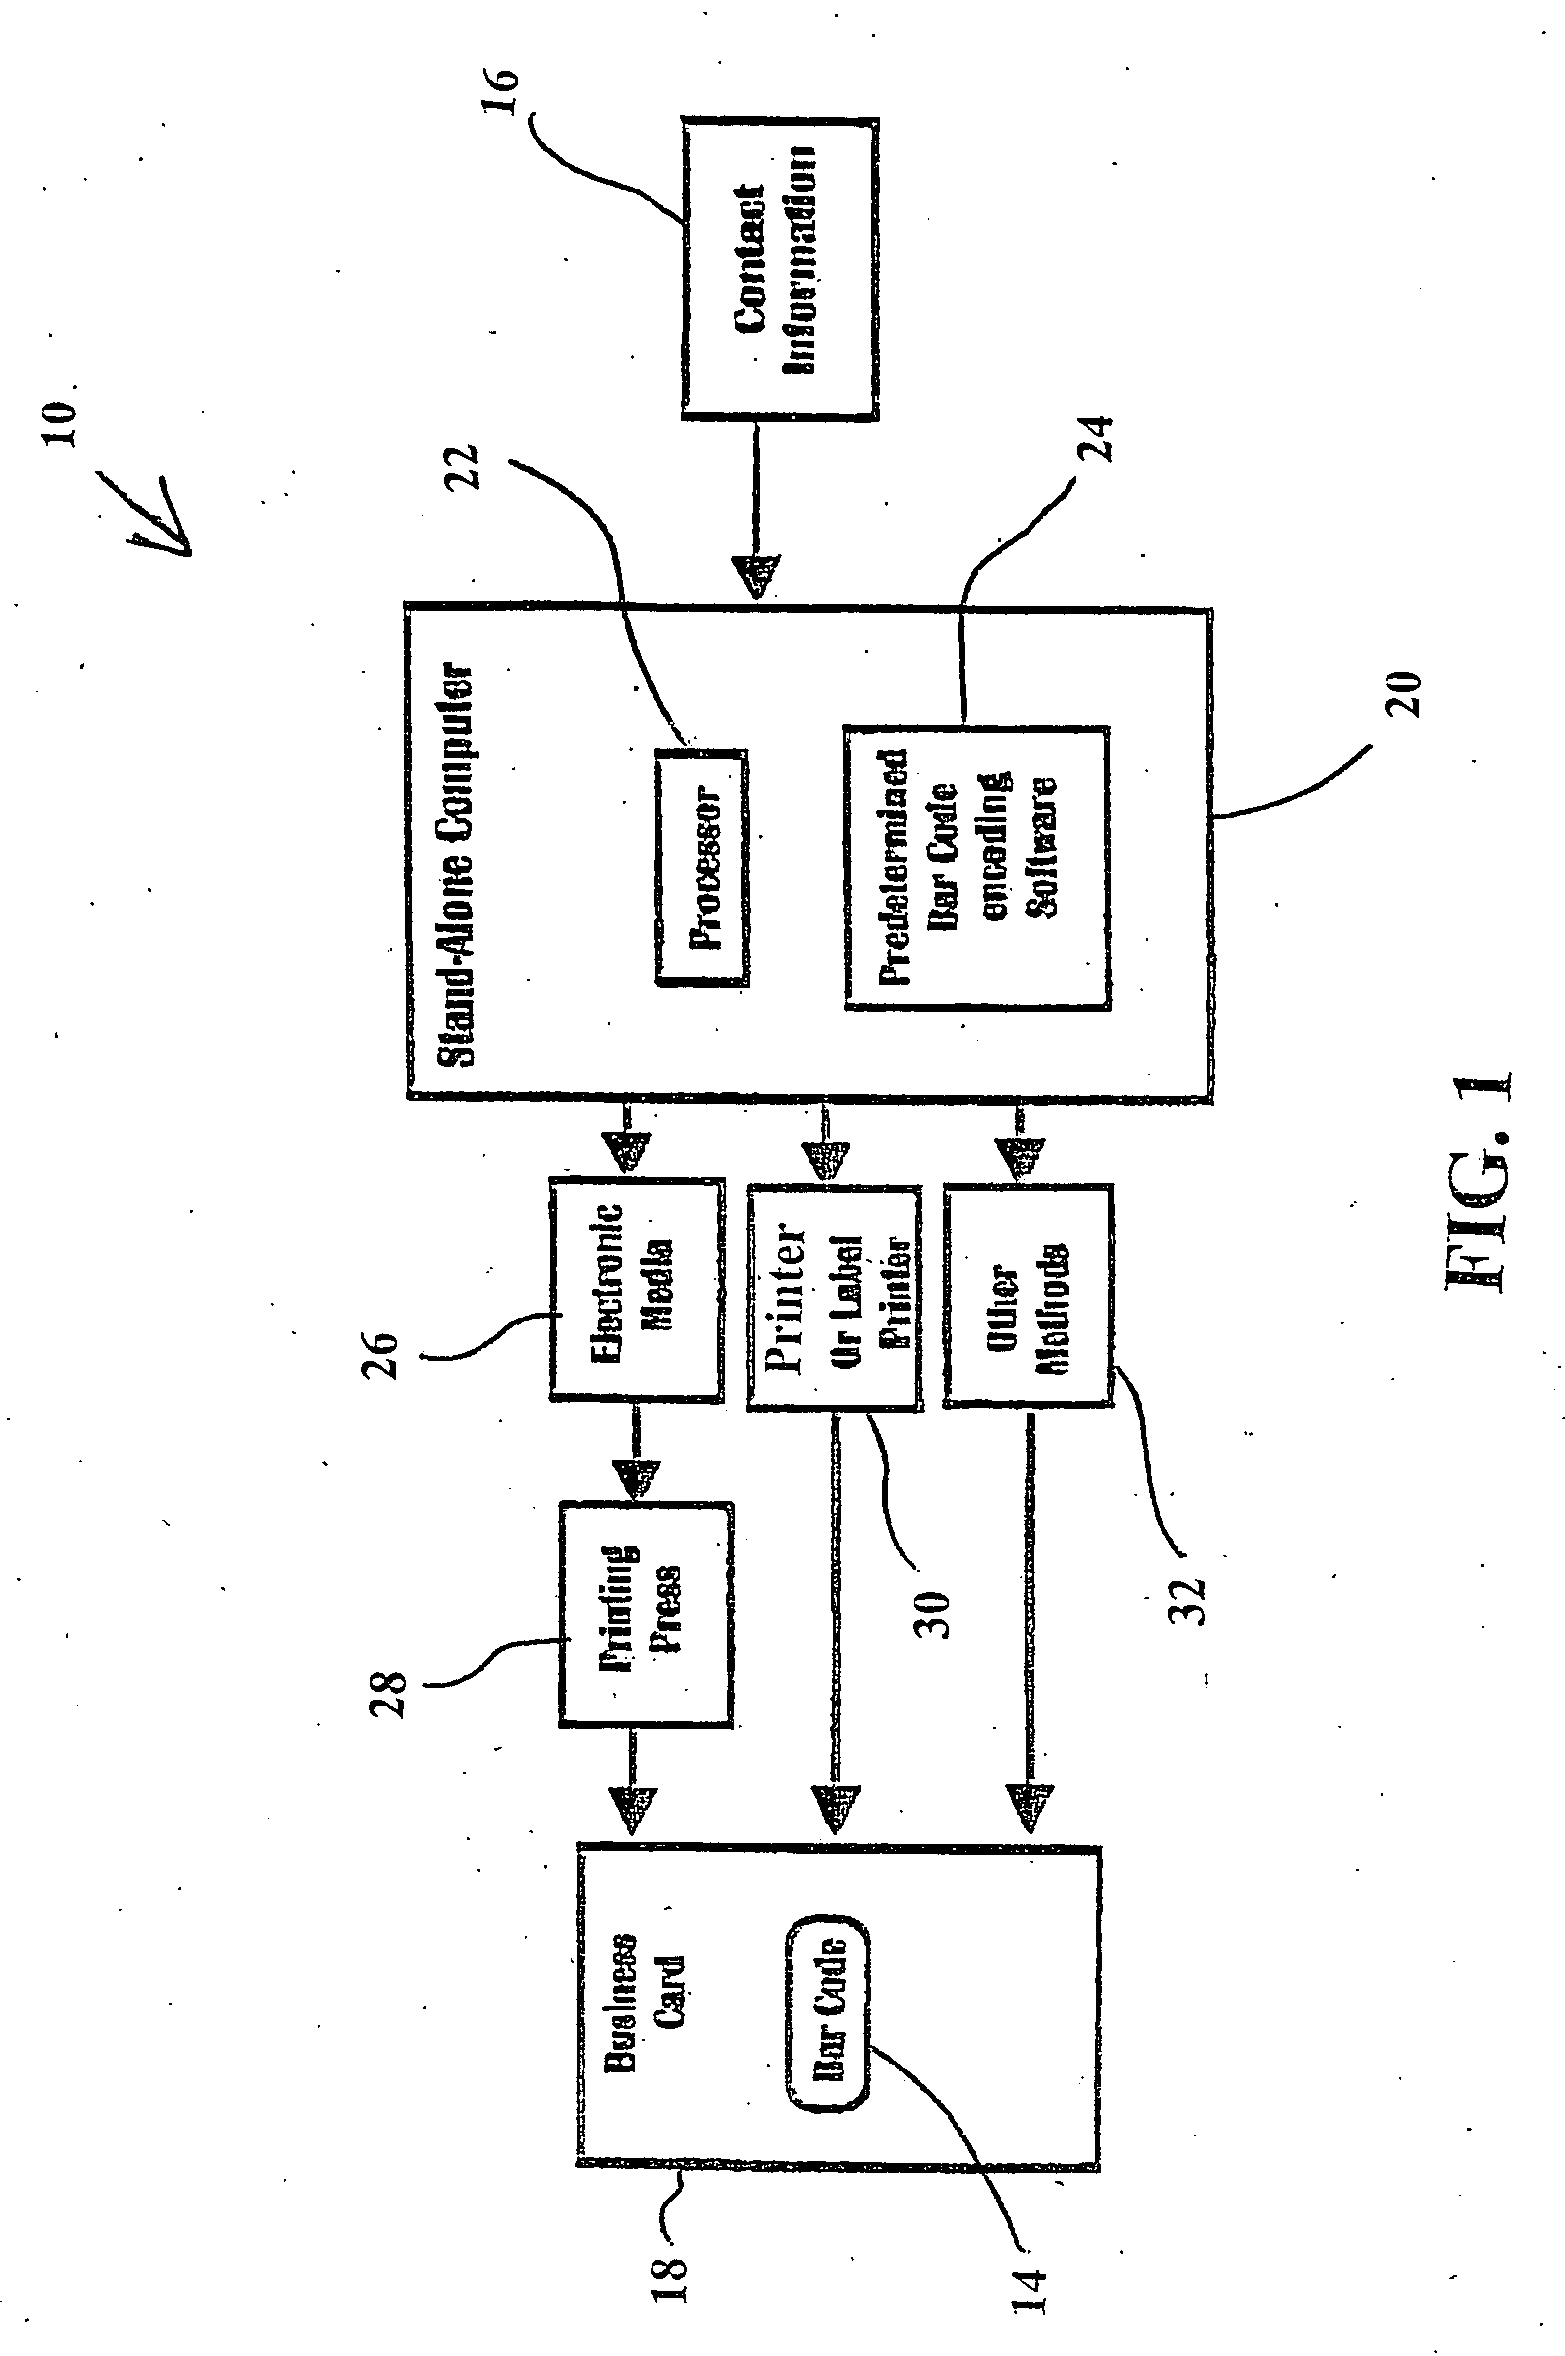 Bar-coded business card information capture and retrieval